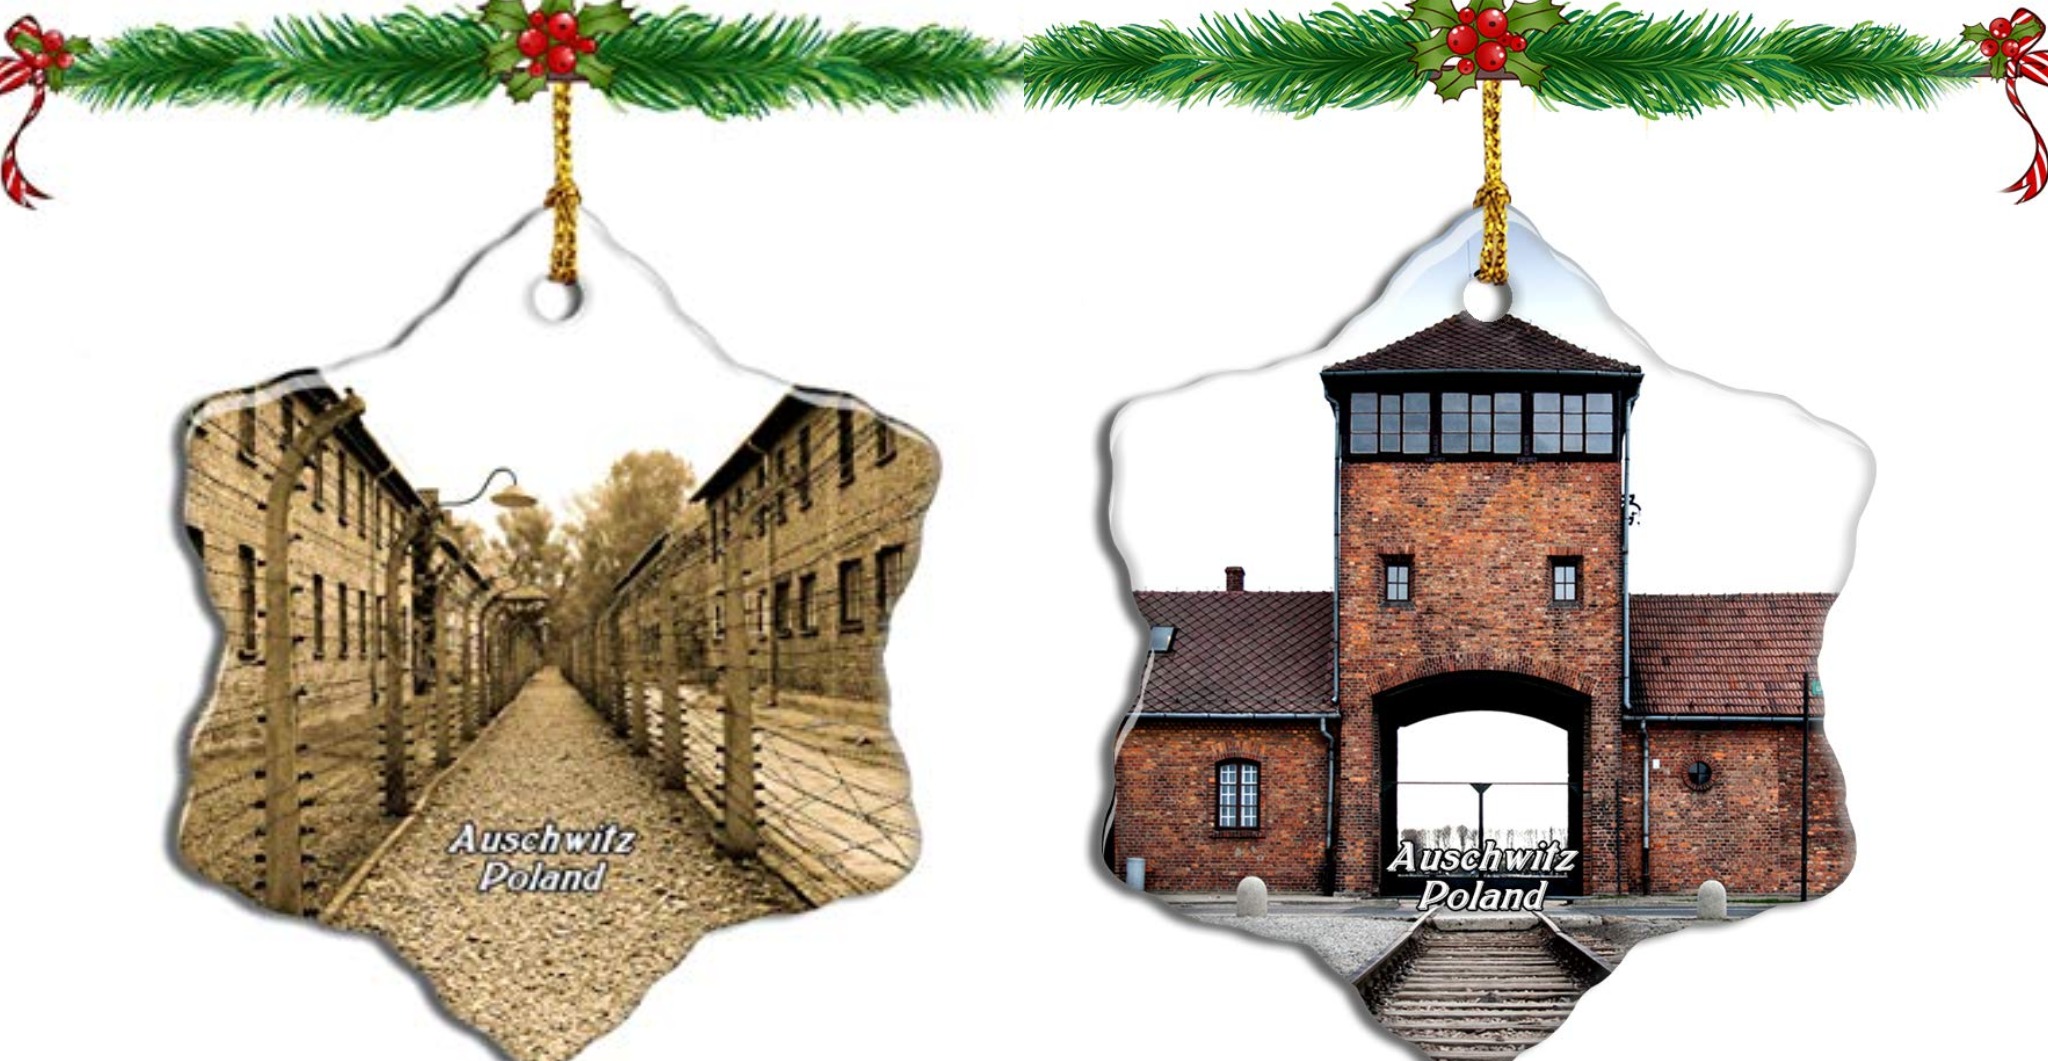 Two of the Auschwitz ornaments which were recalled by Amazon. Images from Auschwitz Memorial Twitter